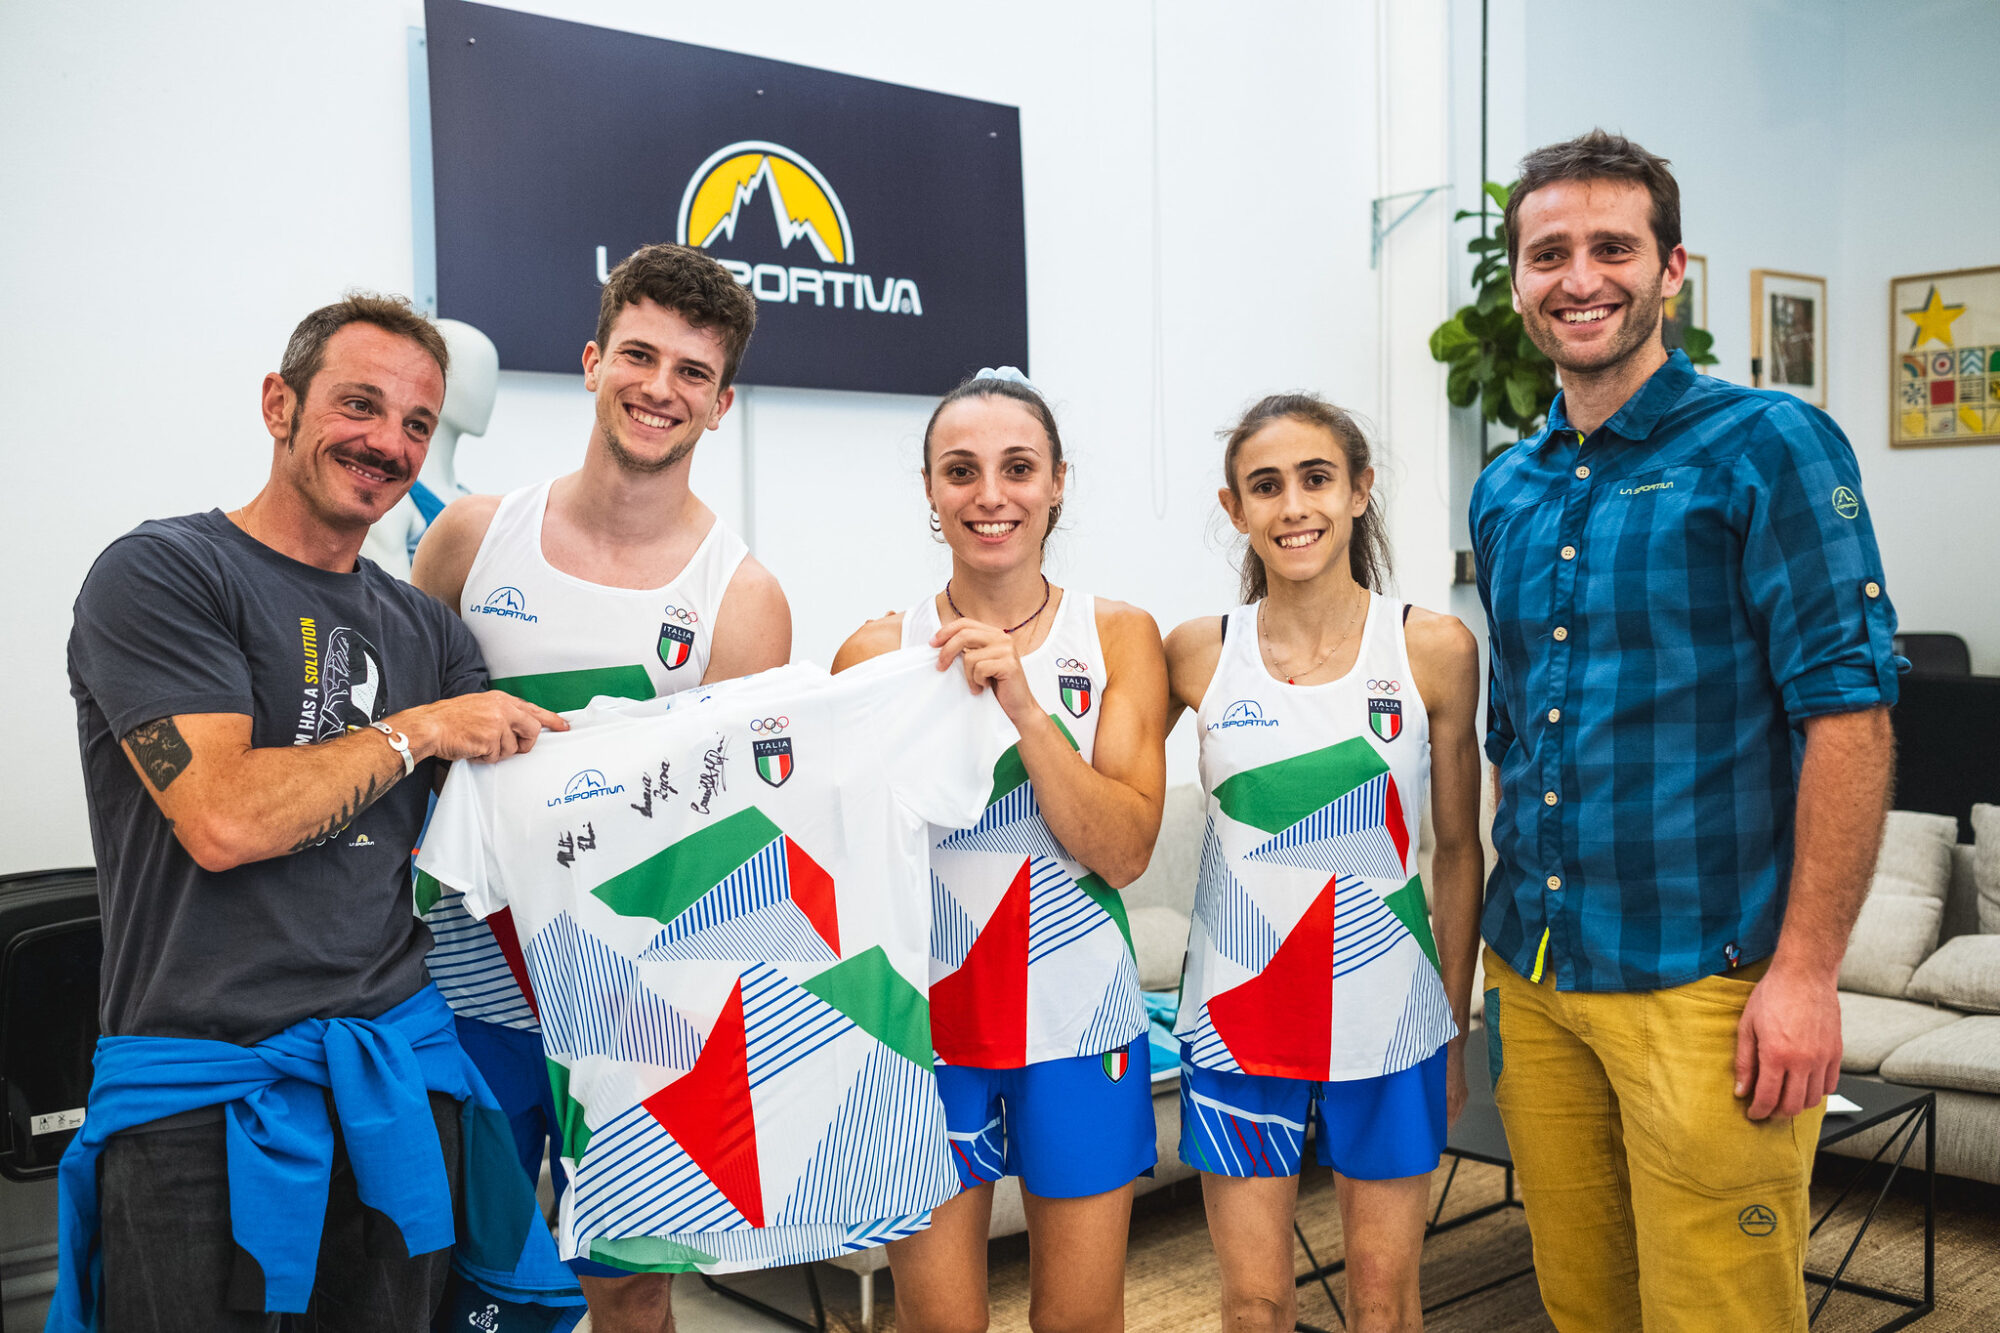 After debuting at the Tokyo 2021 Olympic Games, climbing is back in the spotlight in Paris 2024 with an exceptional Italian team: Matteo Zurloni and Beatrice Colli for the Speed specialty and Camilla Moroni and Laura Rogora for the Boulder&Lead combined. Let's see together what their expectations are and some small trivia in an exclusive interview with three of the four Olympians.